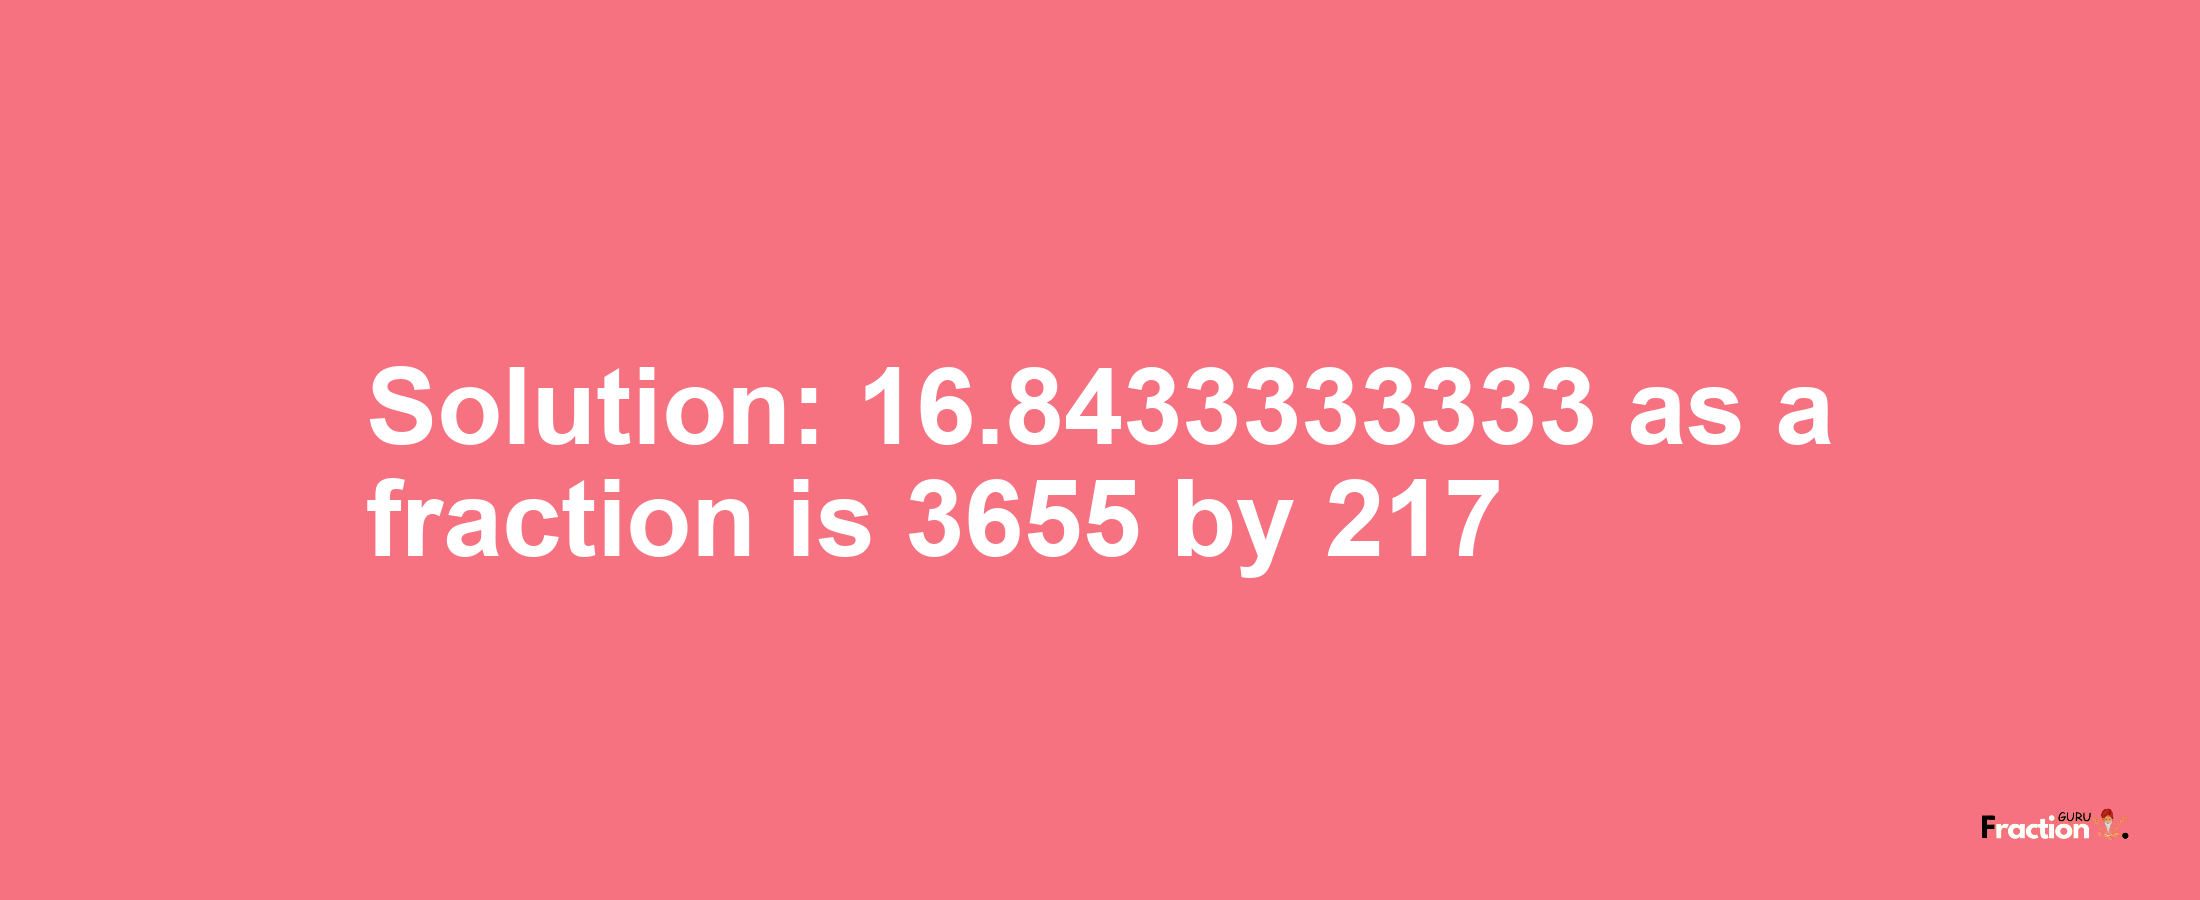 Solution:16.8433333333 as a fraction is 3655/217